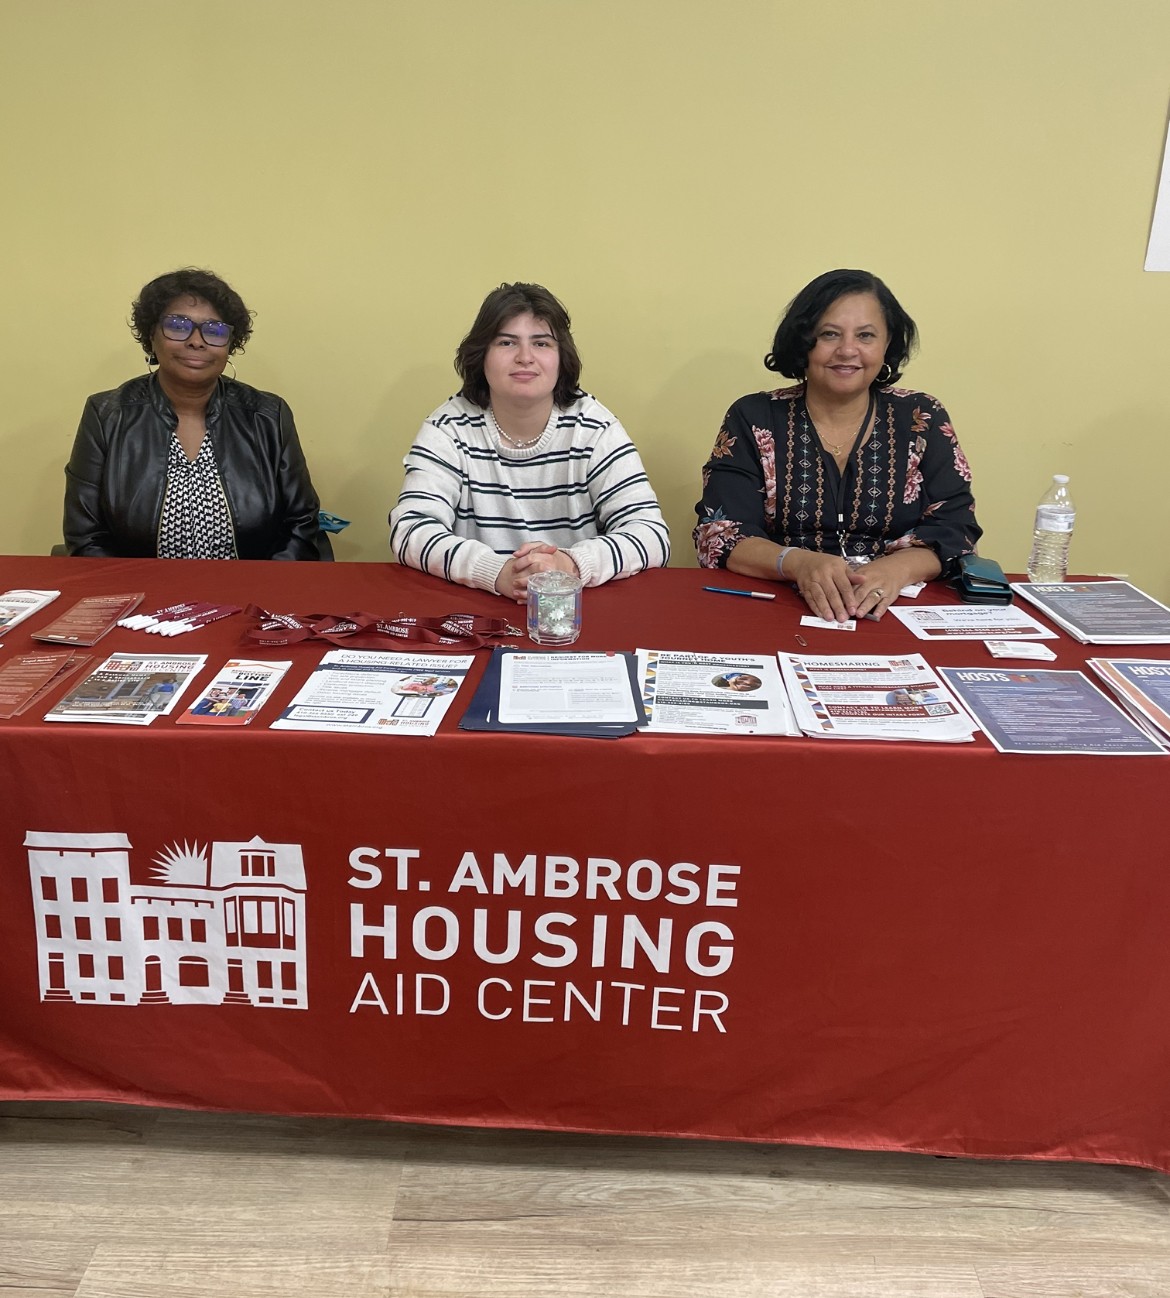 Cathy (left), Kalvin (middle), and Judy (right) at the Emerge Baltimore Community Resource Fair